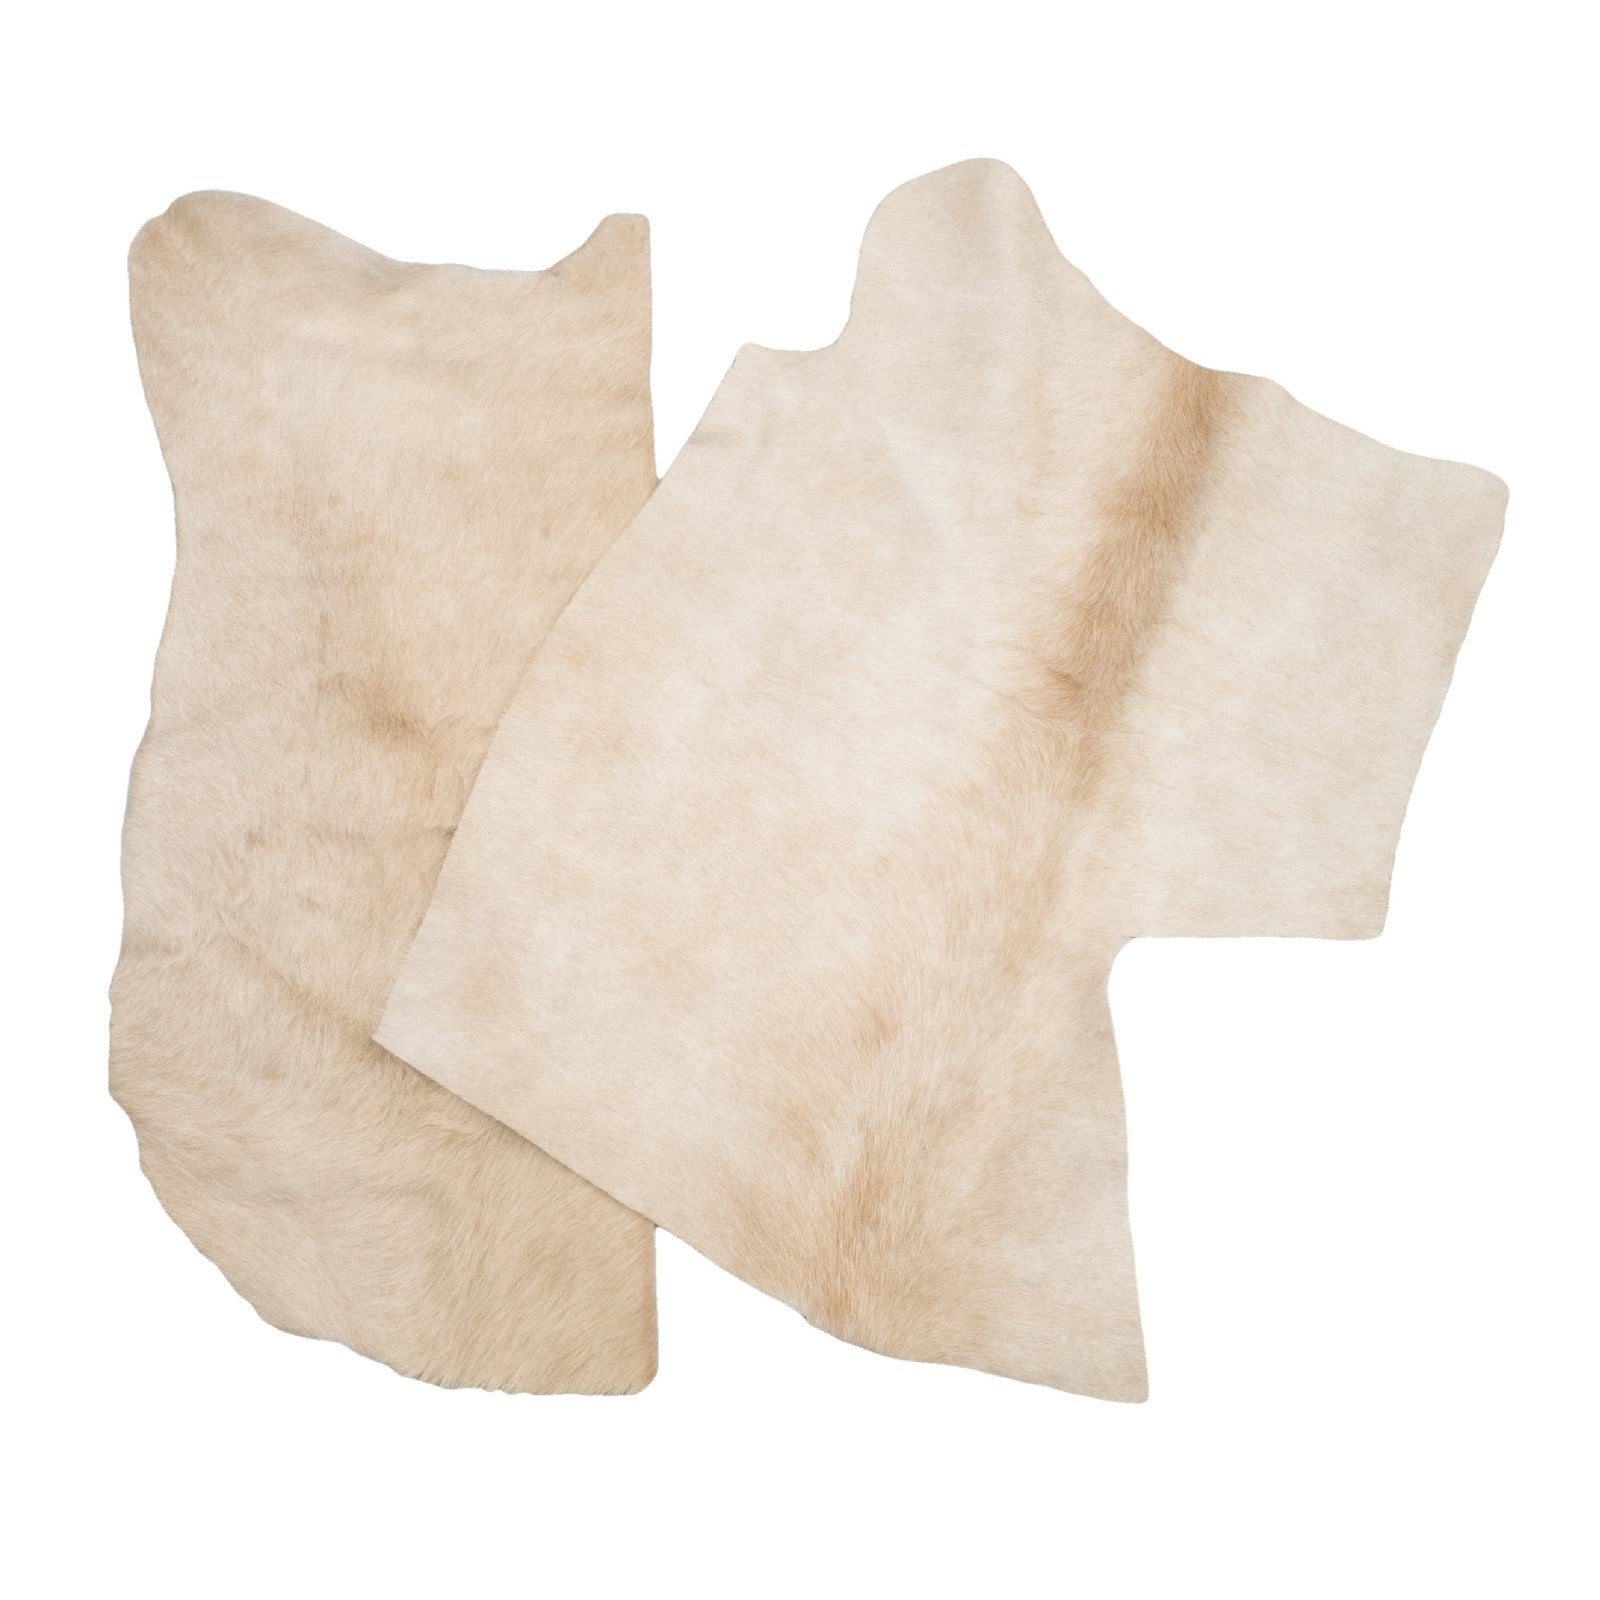 Solid Color, Hair-on Cowhide Scrap Remnant Bags, Large Light Brown (1-3 SqFt) / 1 LB | The Leather Guy